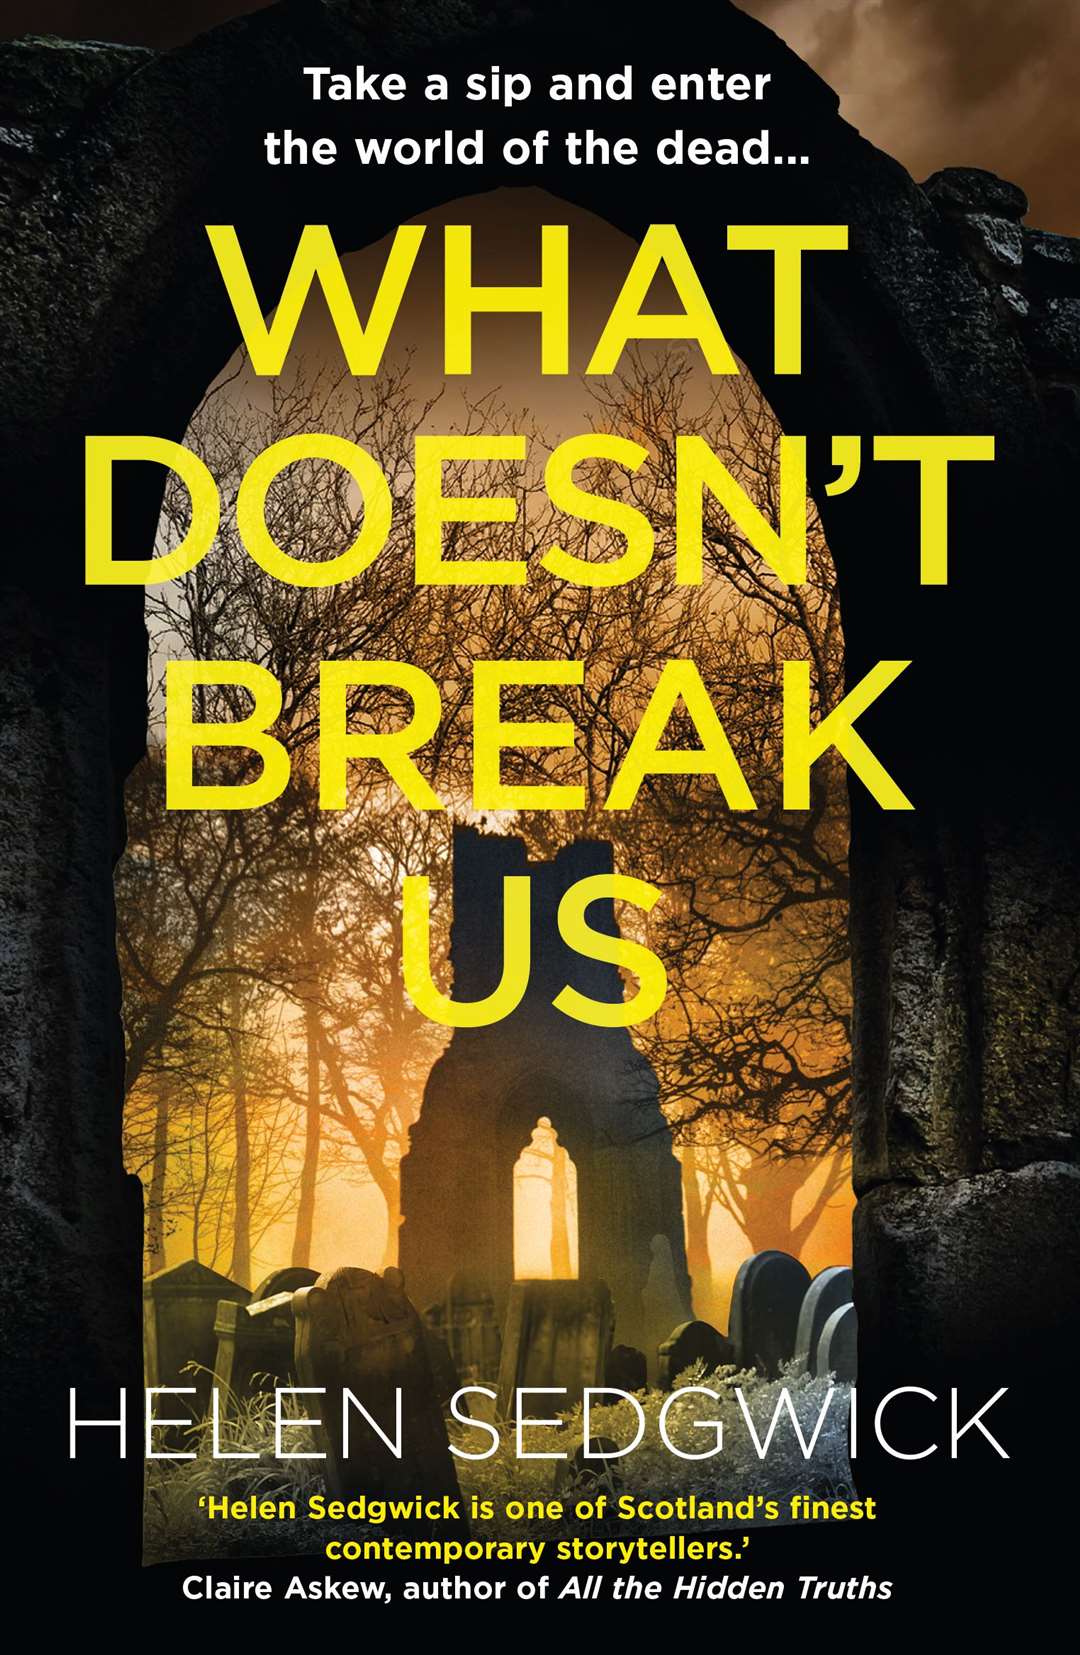 The last book in Helen Sedgwick's Burrowhead mysteries trilogy, out tomorrow (Thursday).